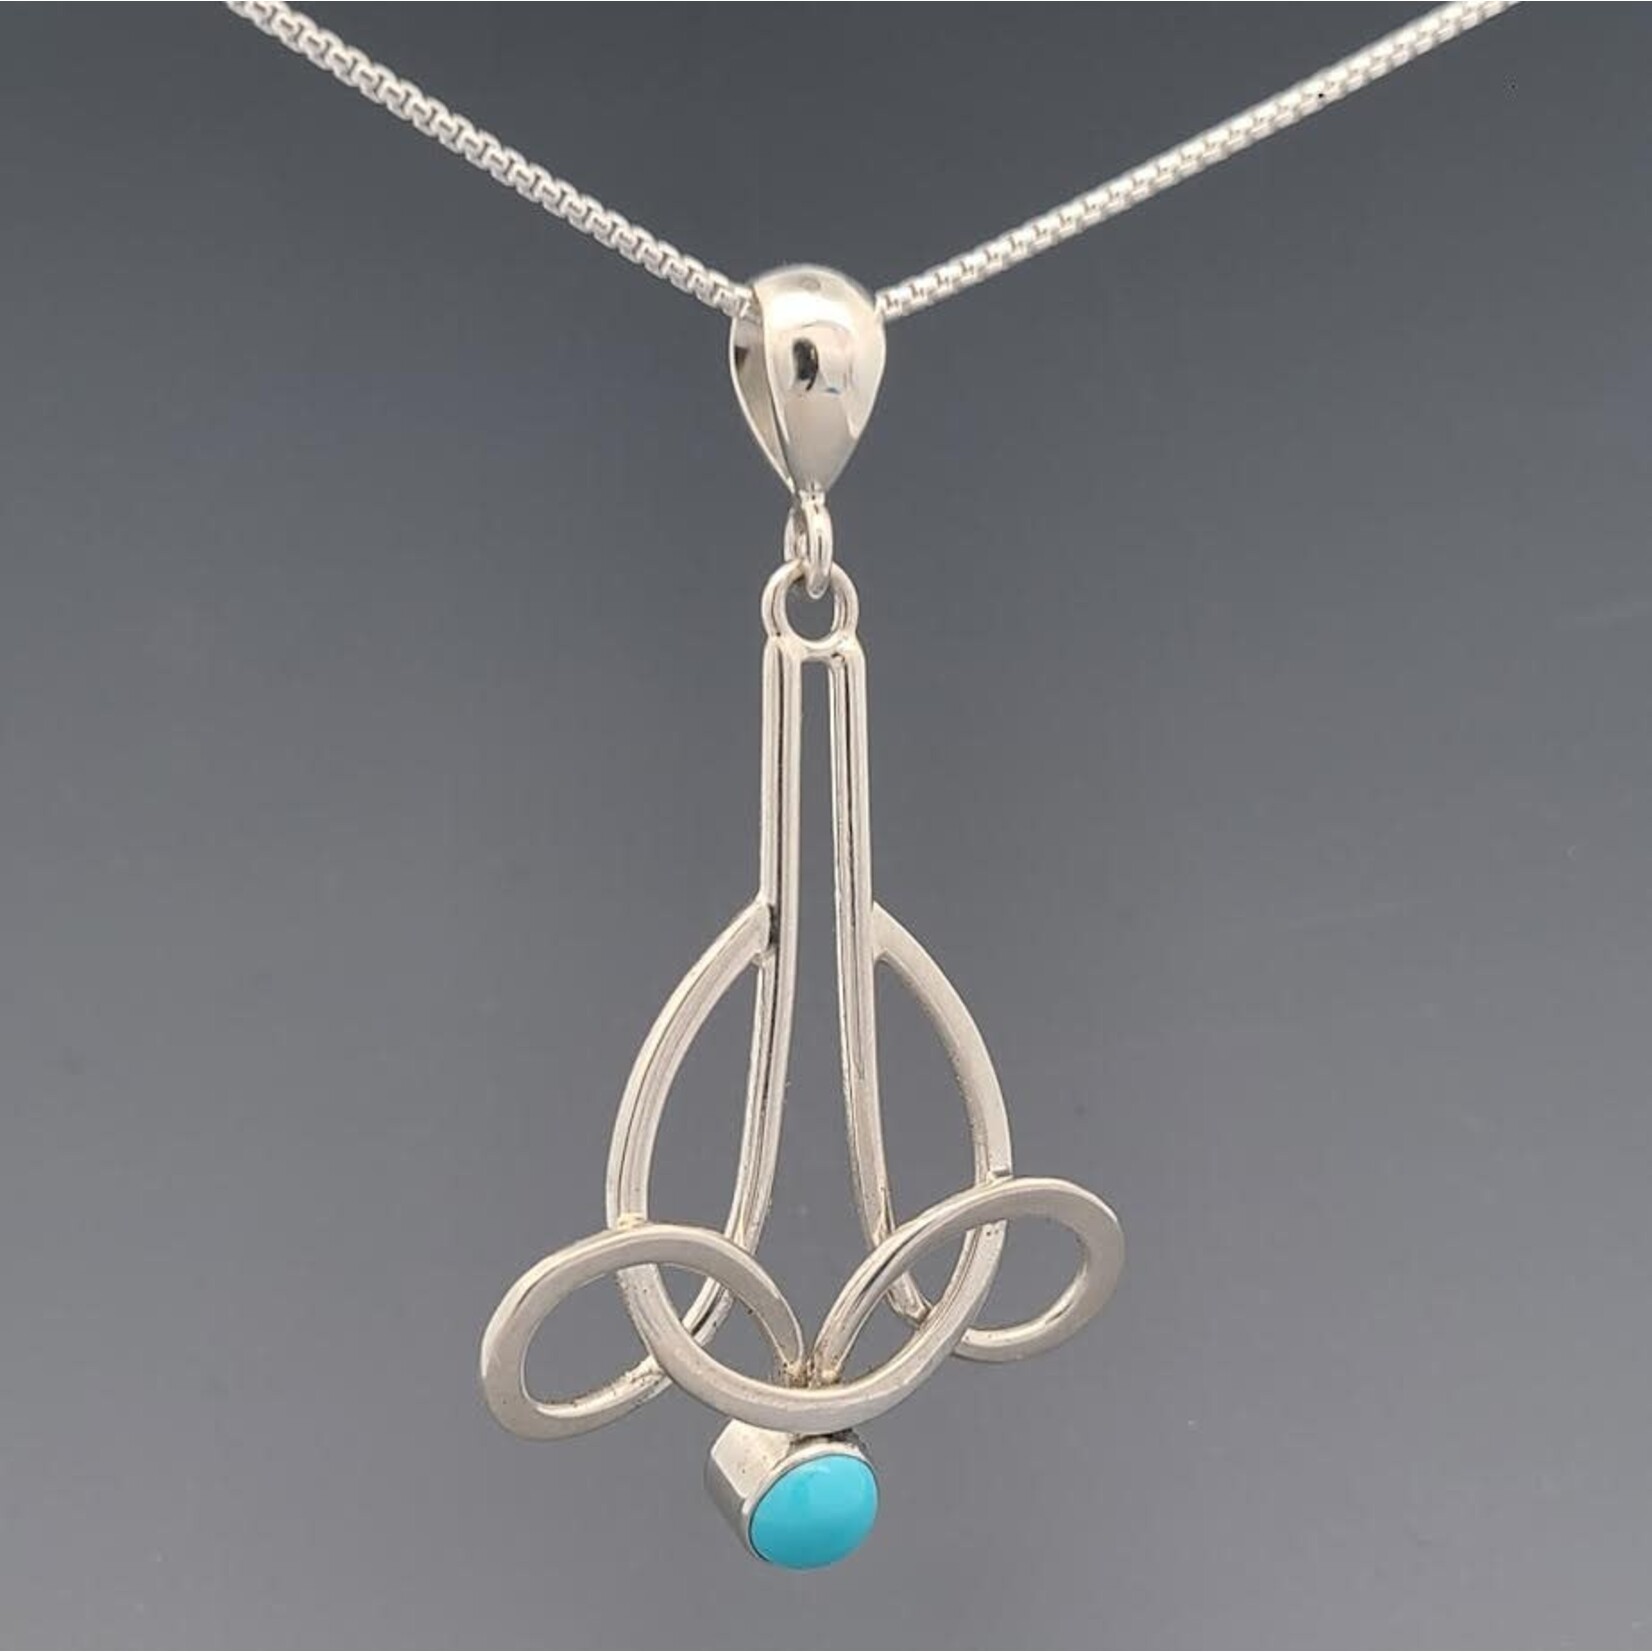 Modern Heirloom® Elegant Hand Forged Turquoise Necklace